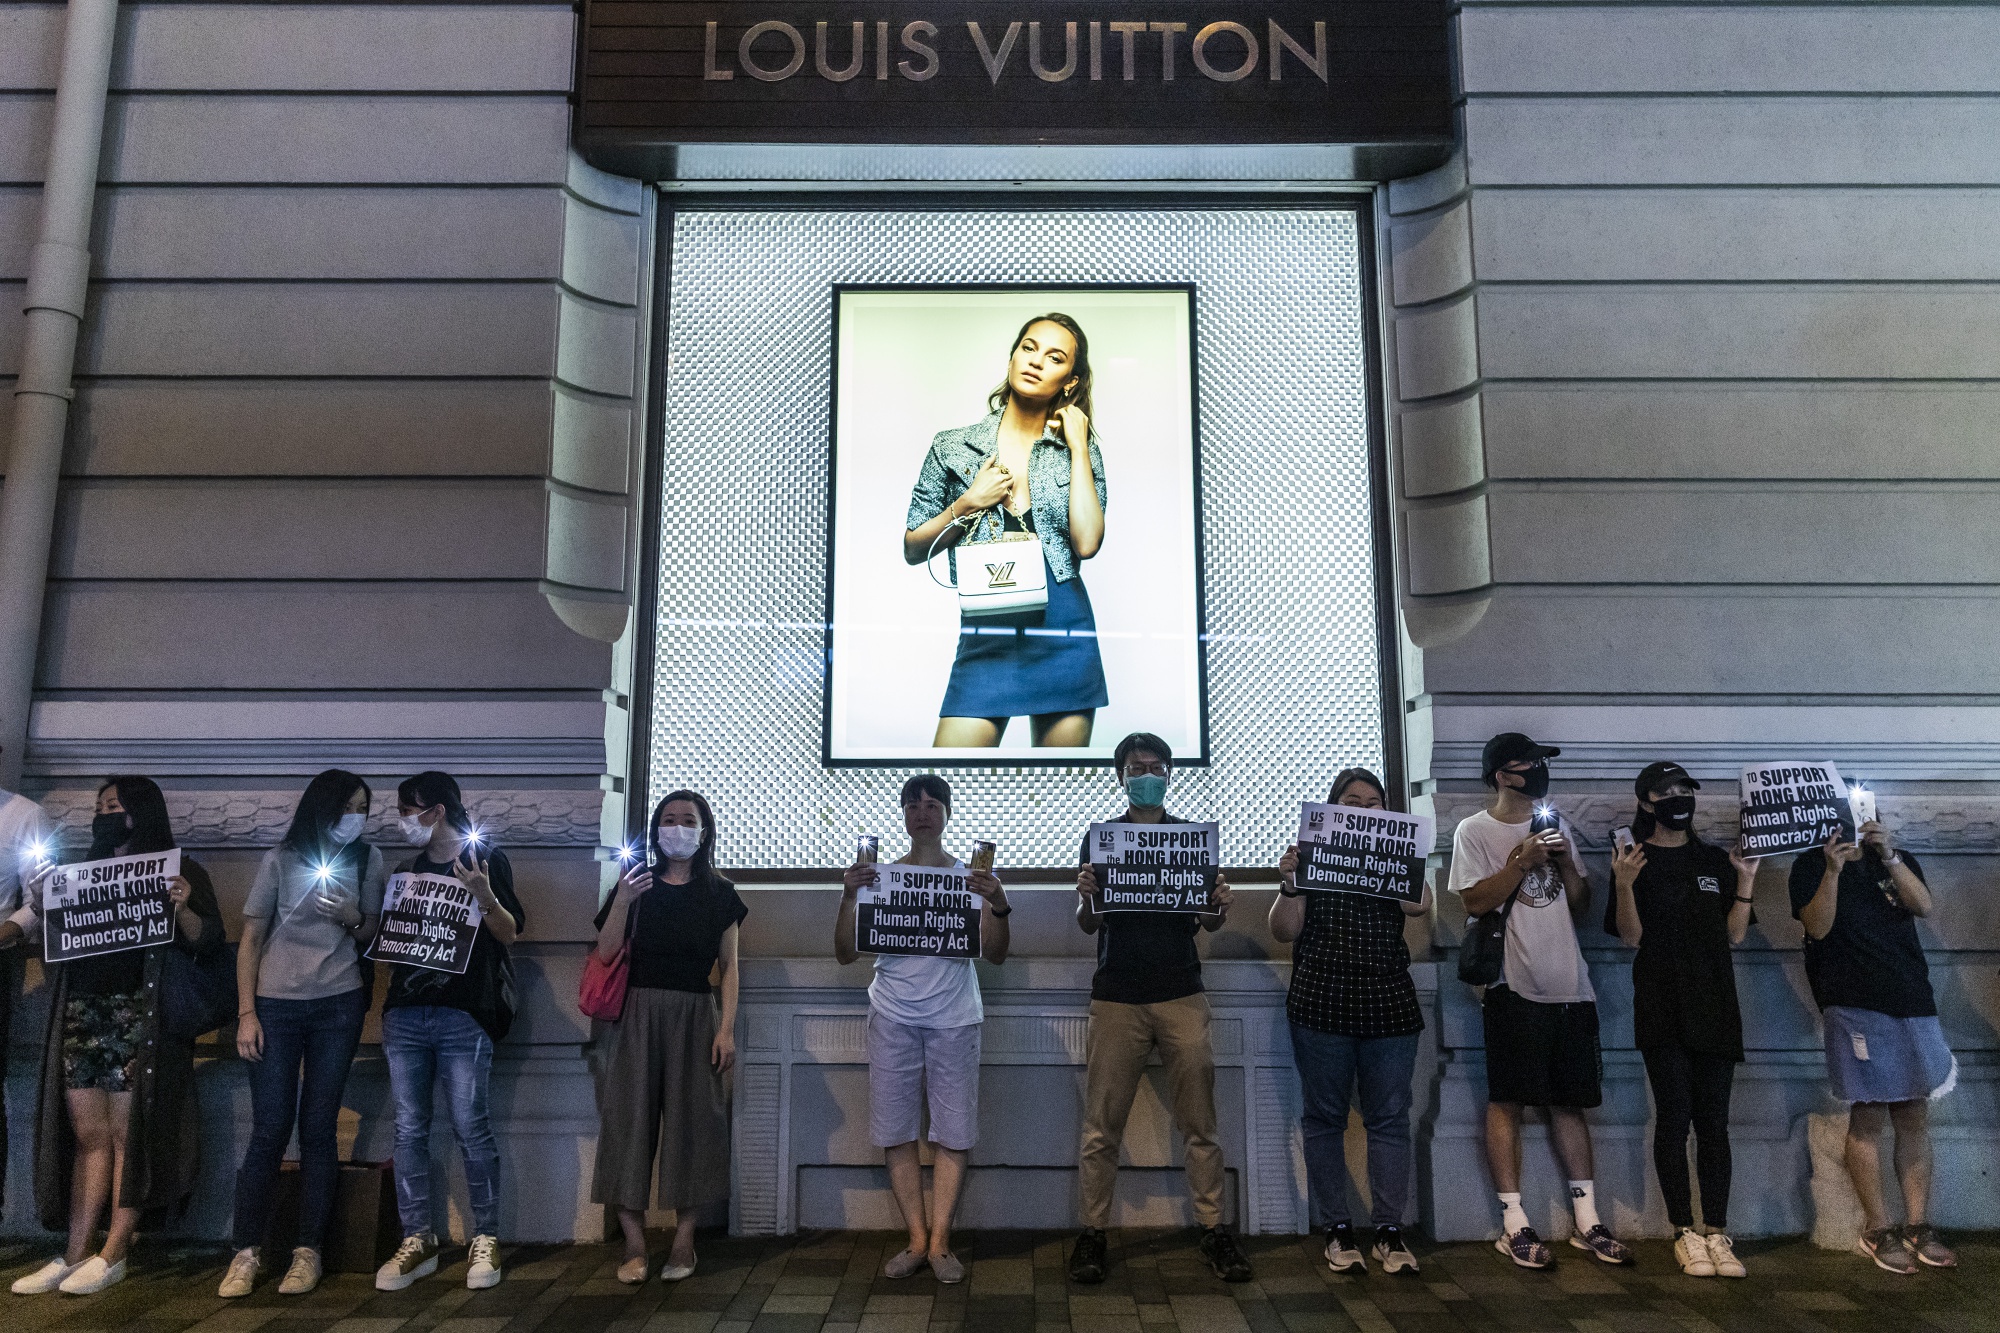 Louis Vuitton bag goes missing after purchase made by Mainland